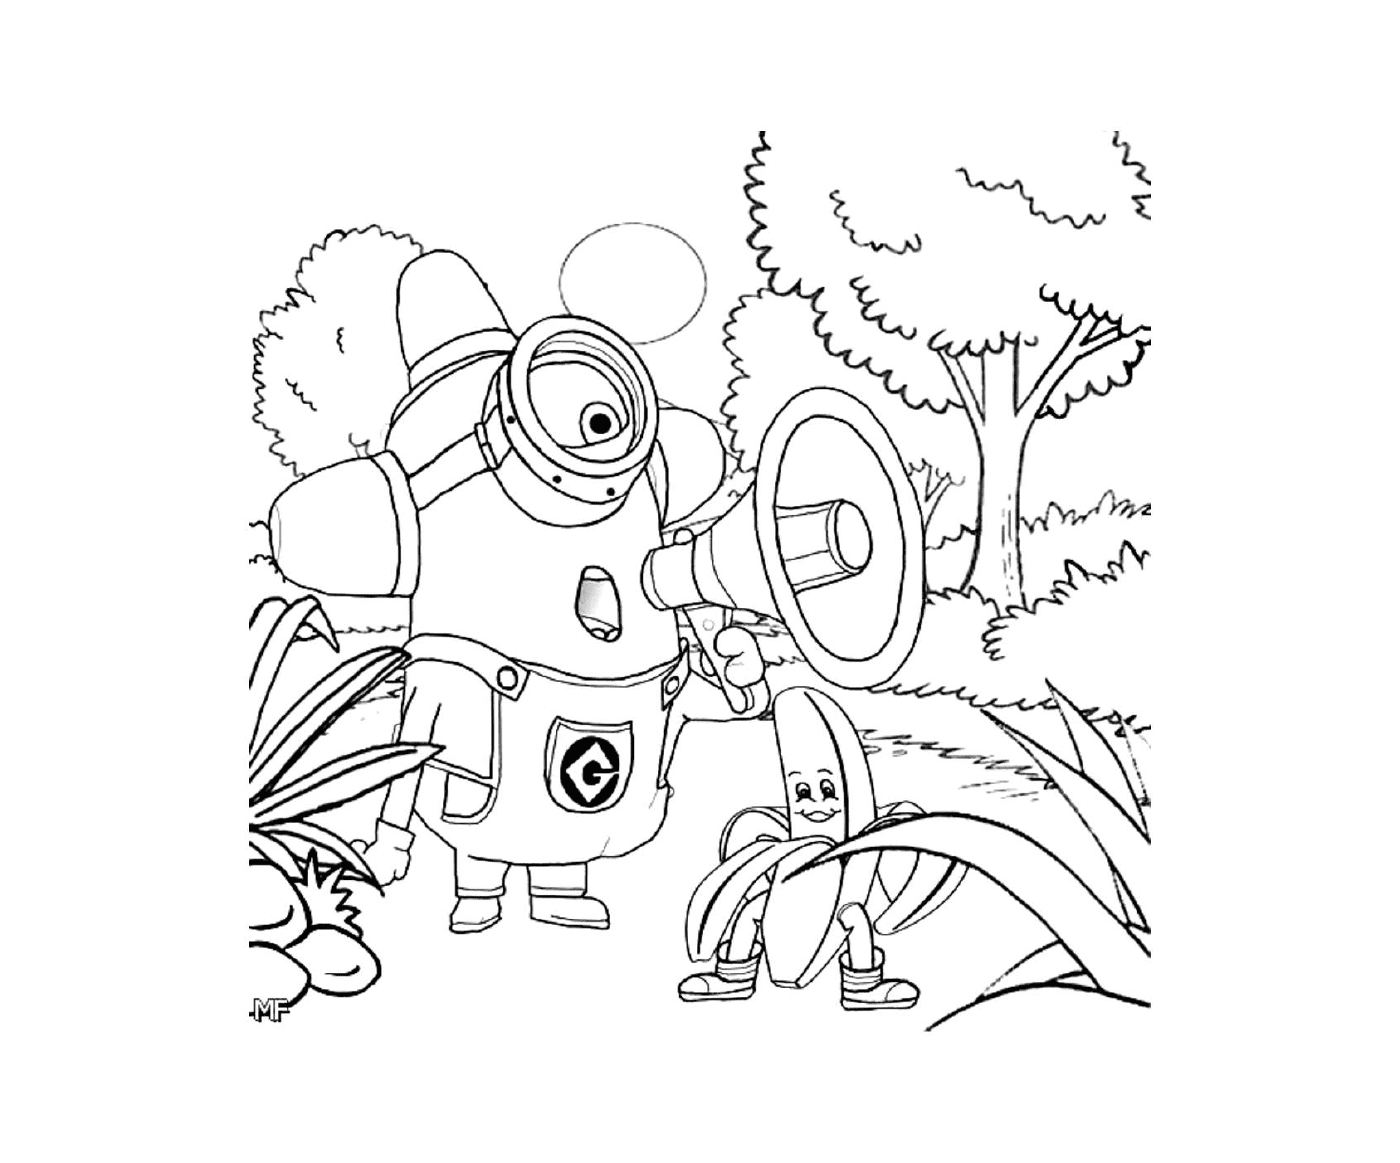  Minion in the forest, robot and spider 